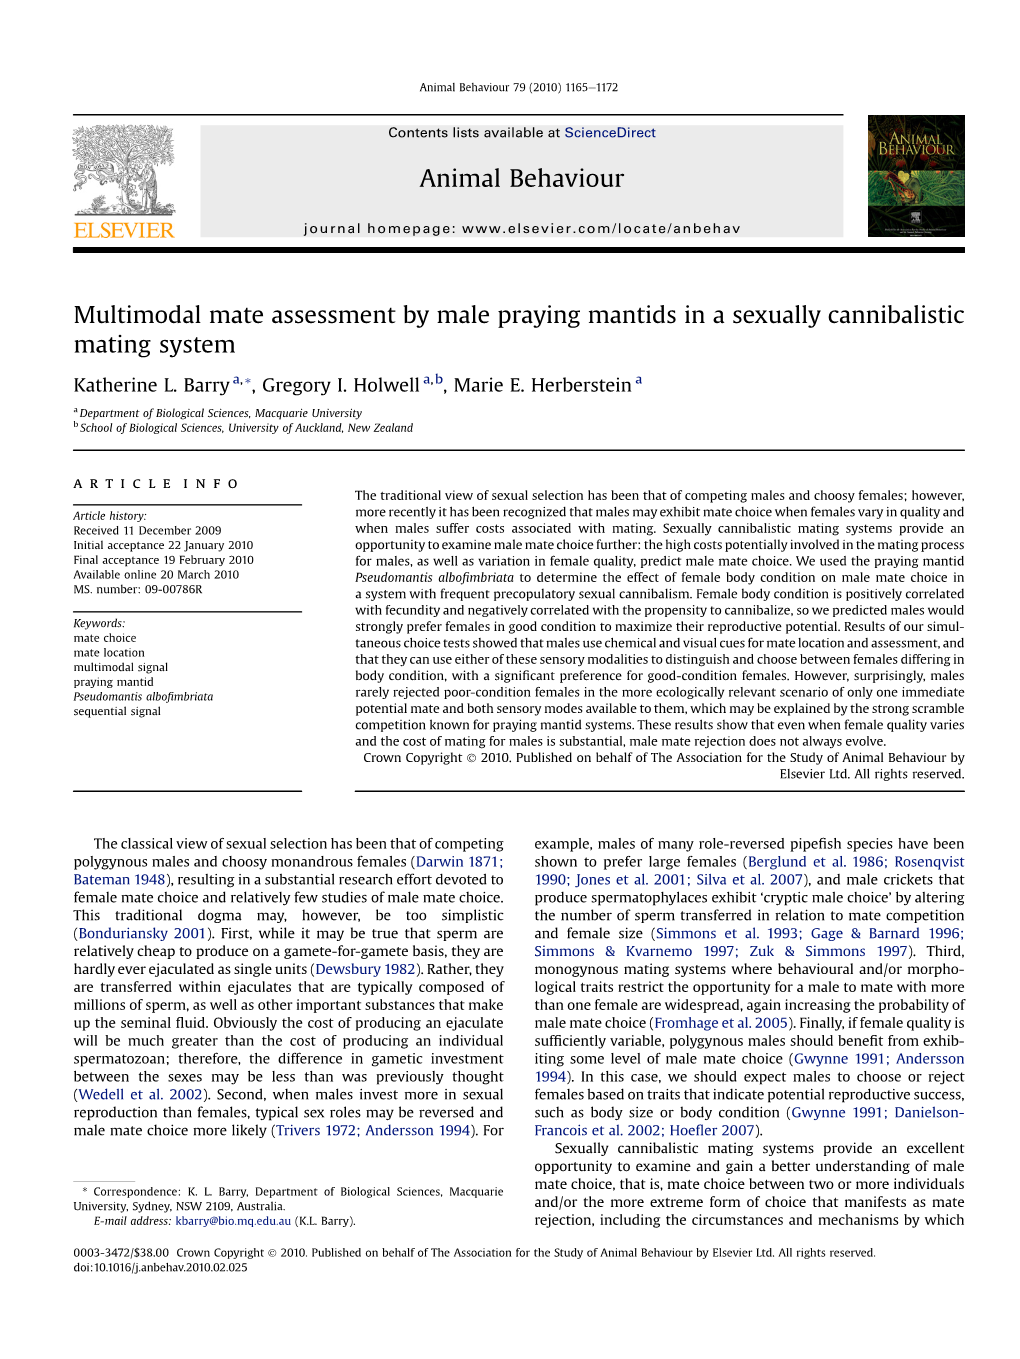 Multimodal Mate Assessment by Male Praying Mantids in a Sexually Cannibalistic Mating System